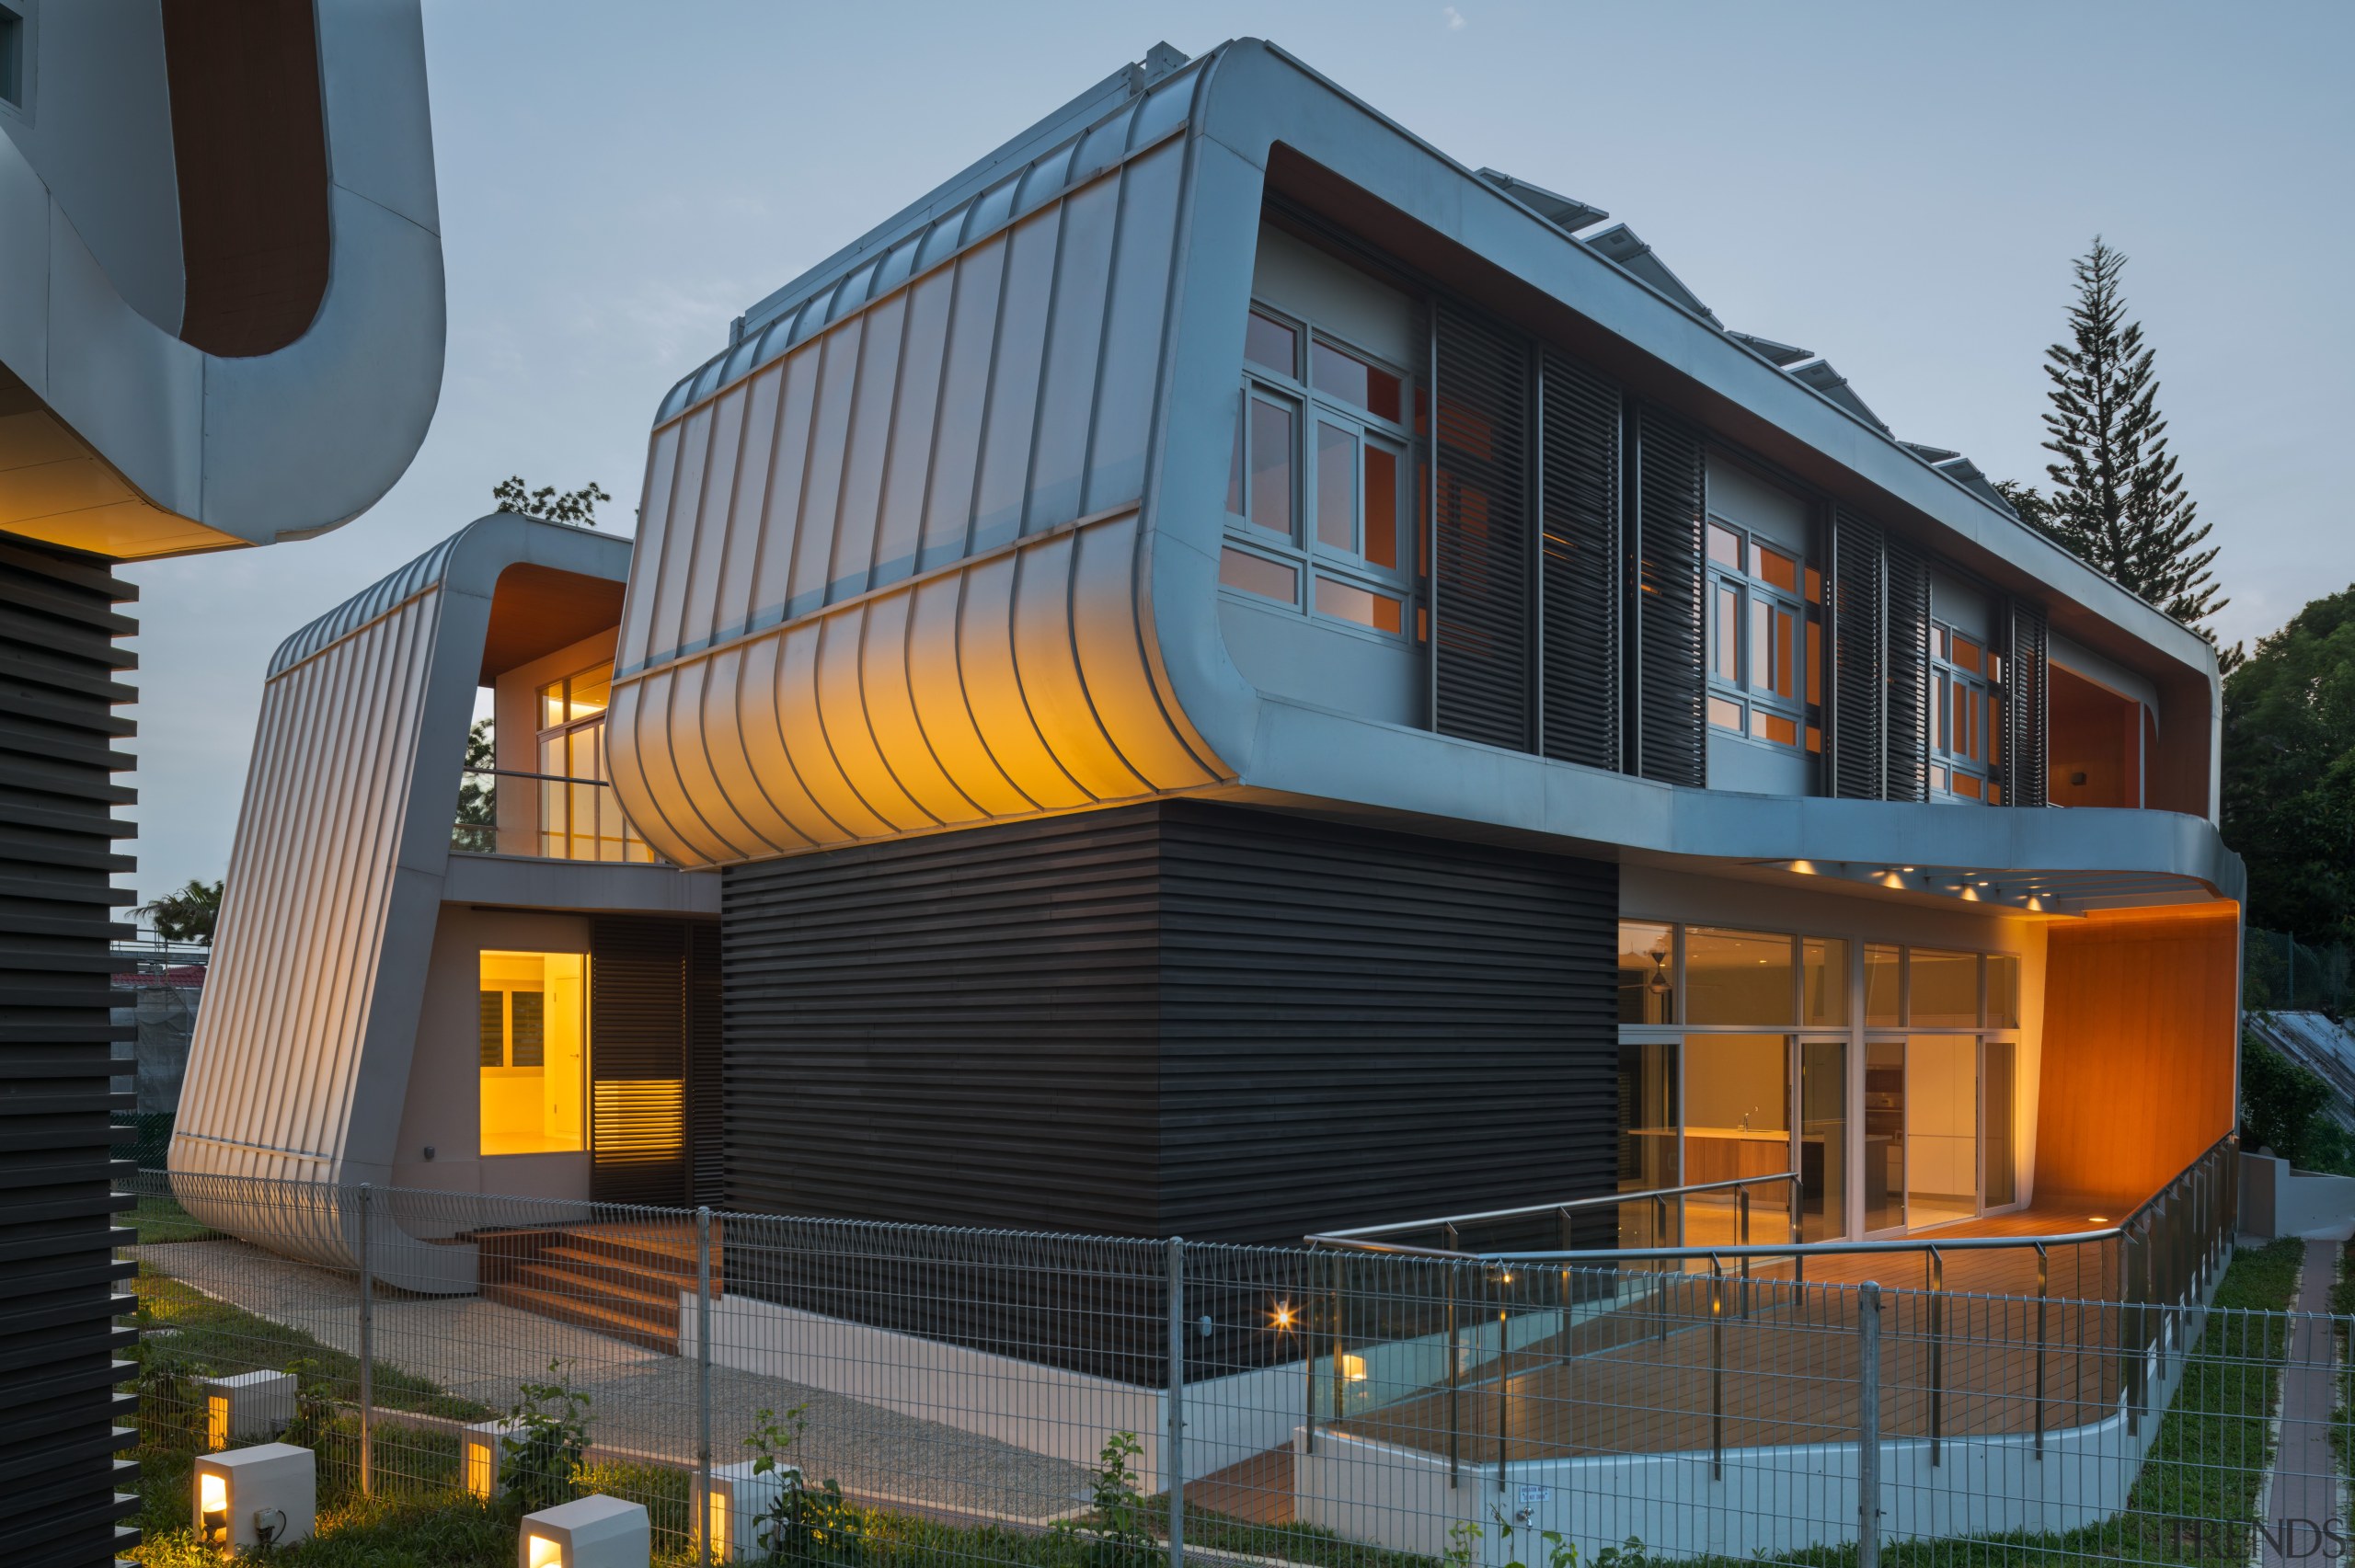 Exterior evening - B House 08 - architecture architecture, building, corporate headquarters, facade, home, house, mixed use, siding, black, gray